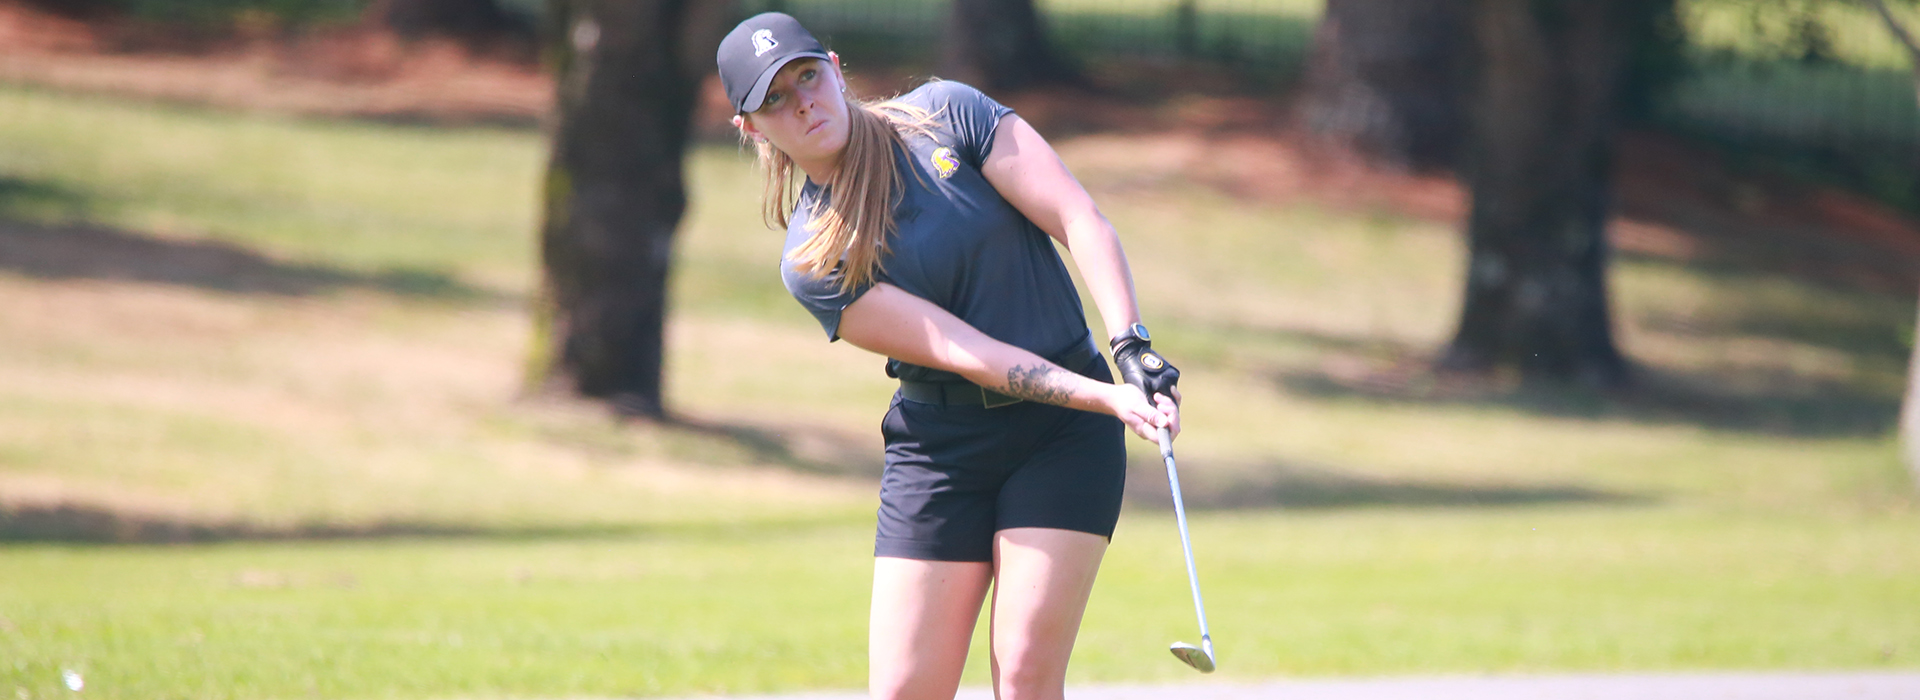 Golden Eagle women's golf team completes round one of Golfweek Fall Challenge